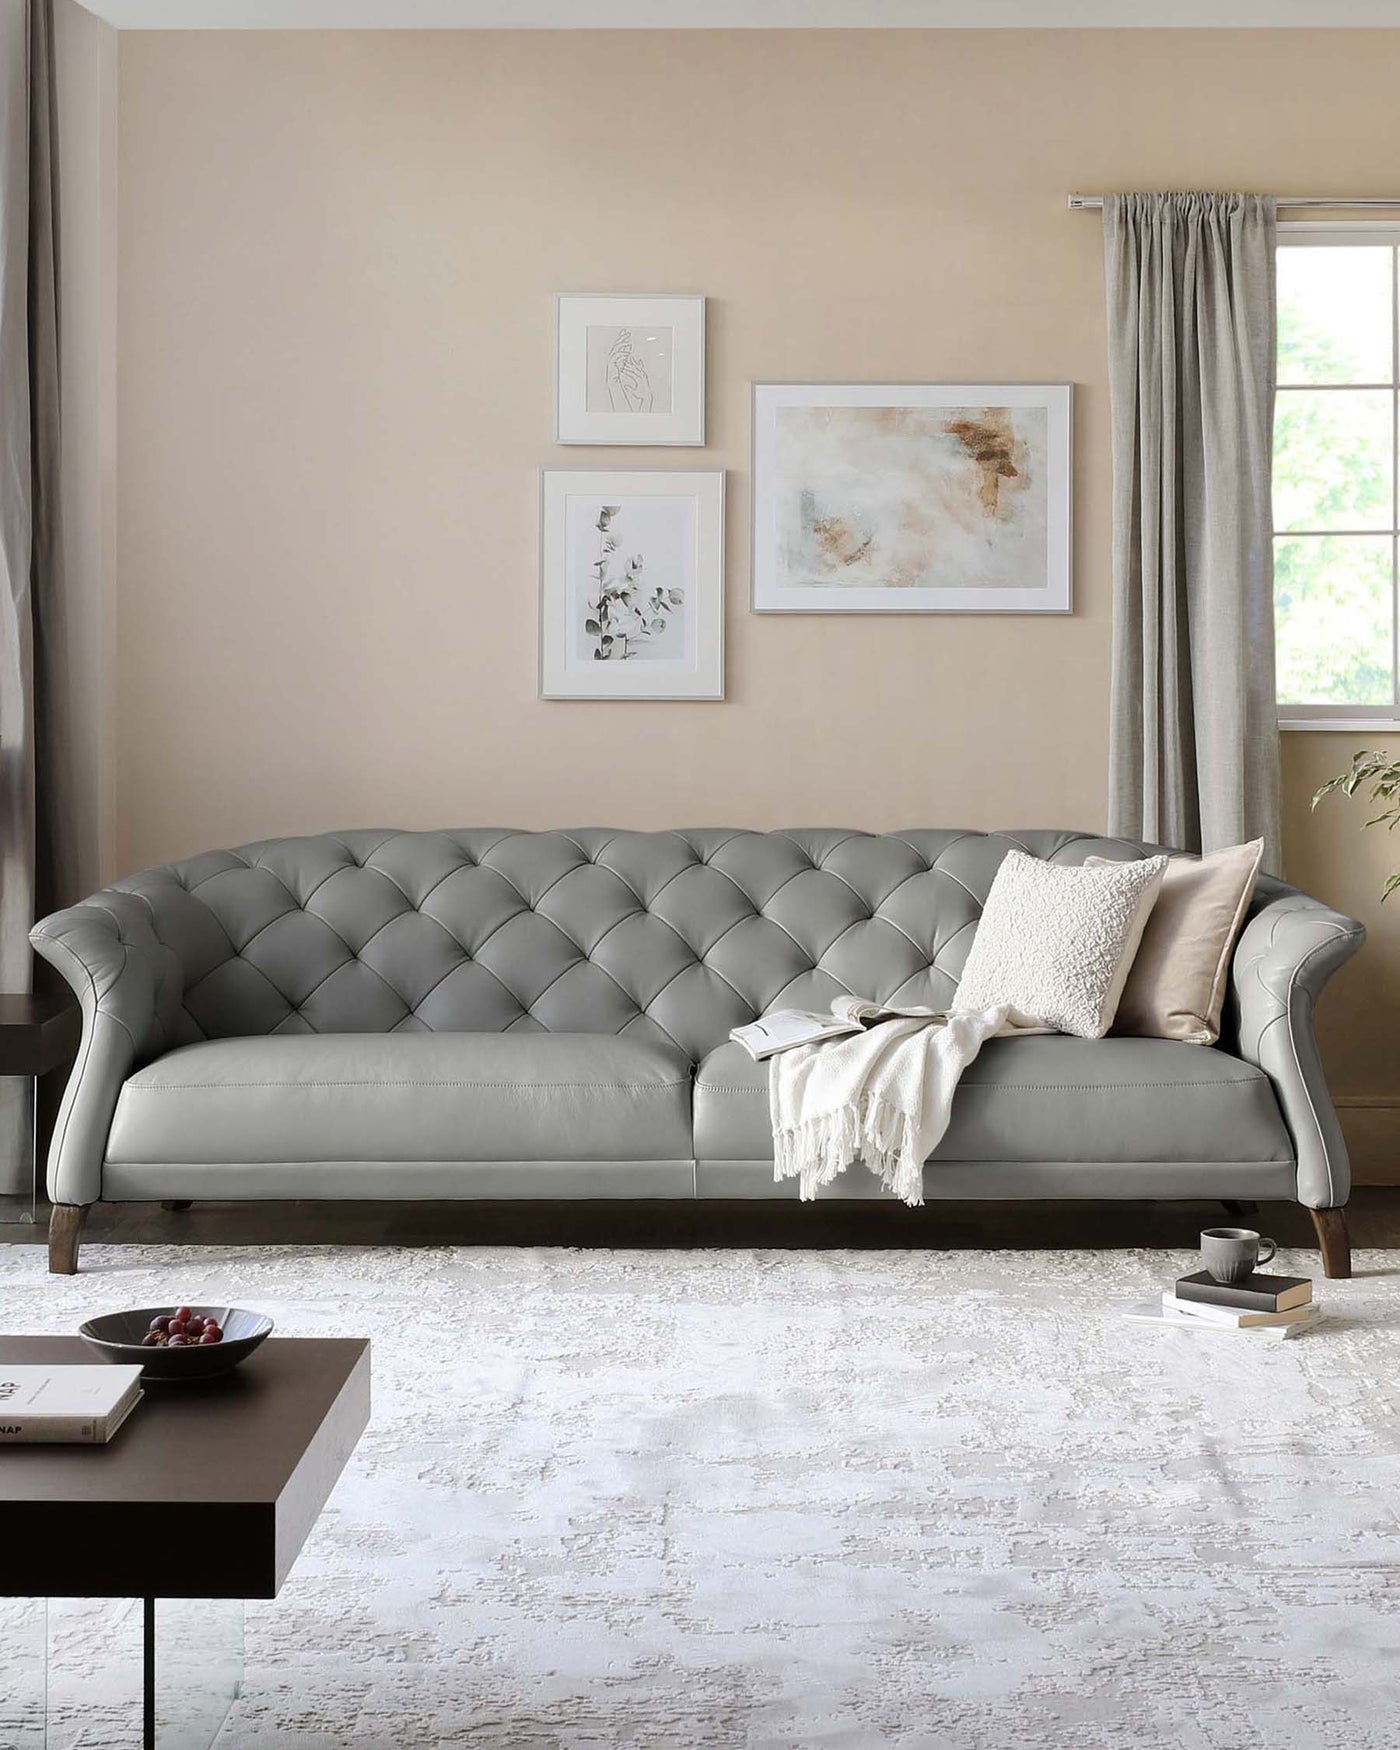 Elegant tufted back grey sofa with scrolled armrests on wooden legs, paired with a modern black square coffee table on an abstract-patterned off-white area rug.